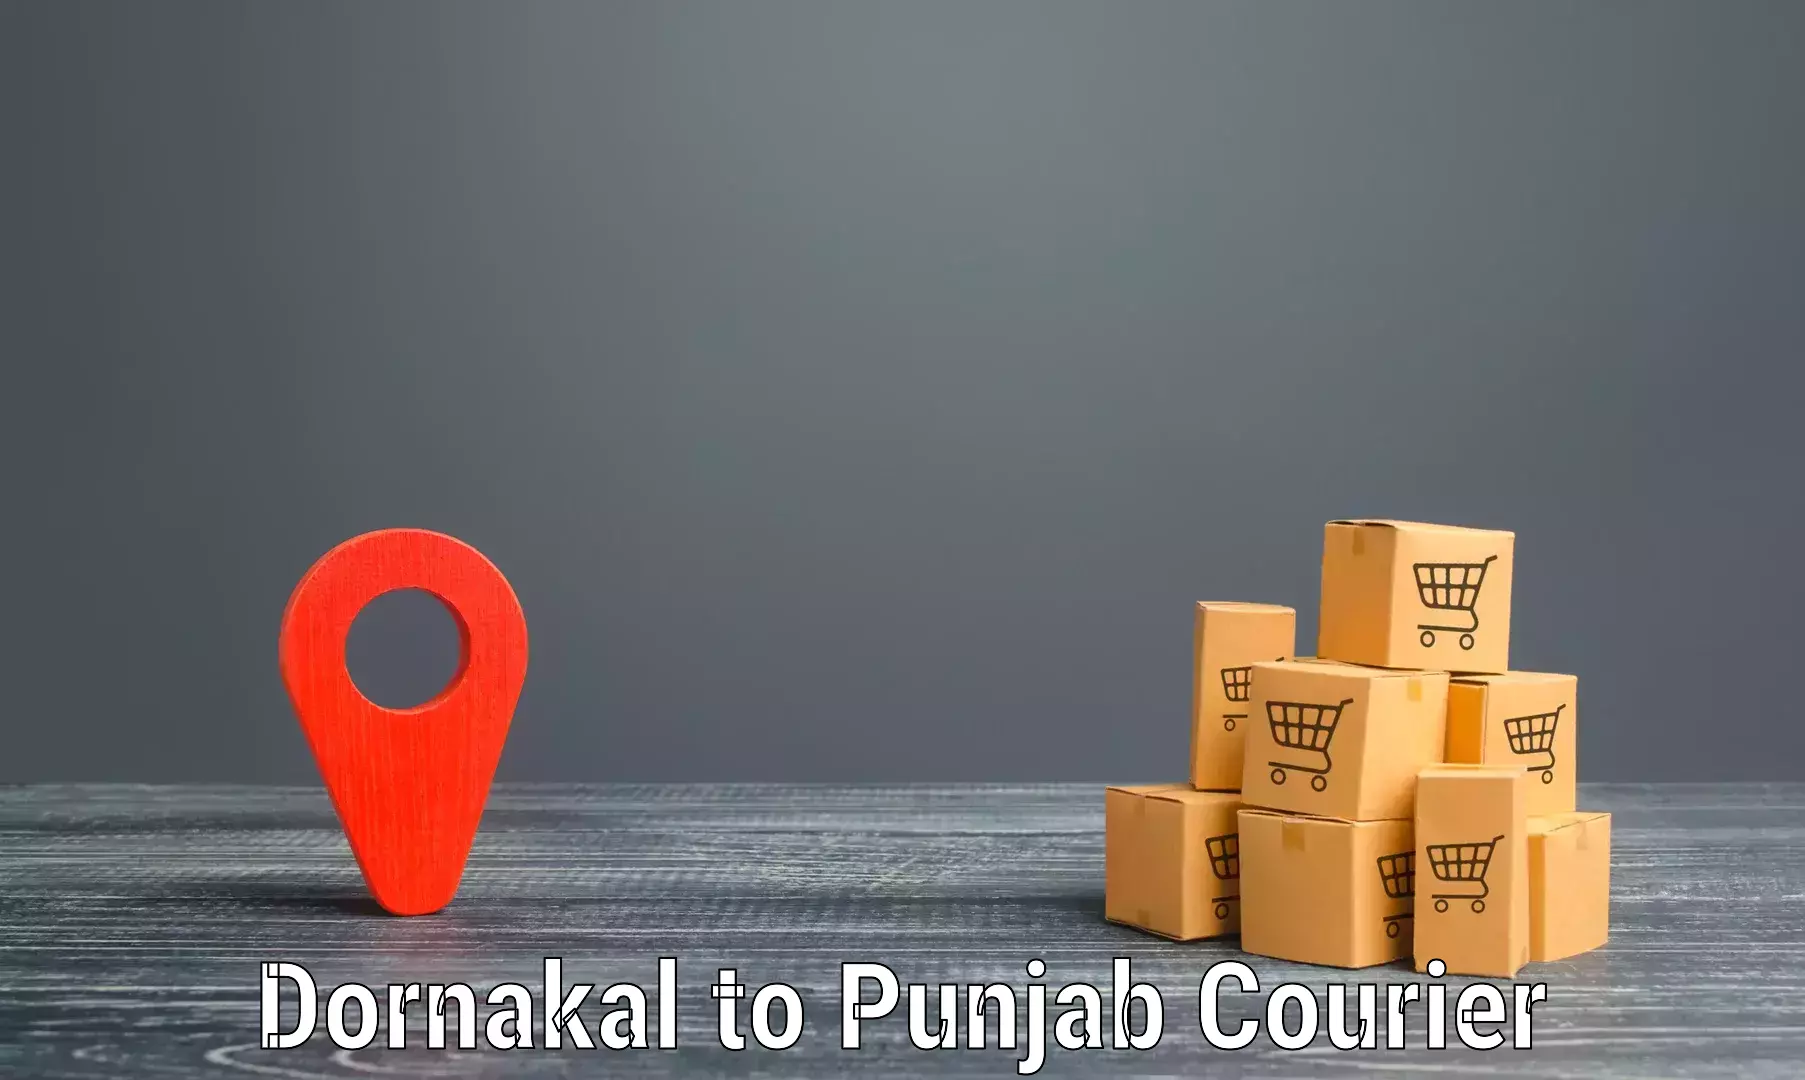 Automated parcel services Dornakal to Dhilwan